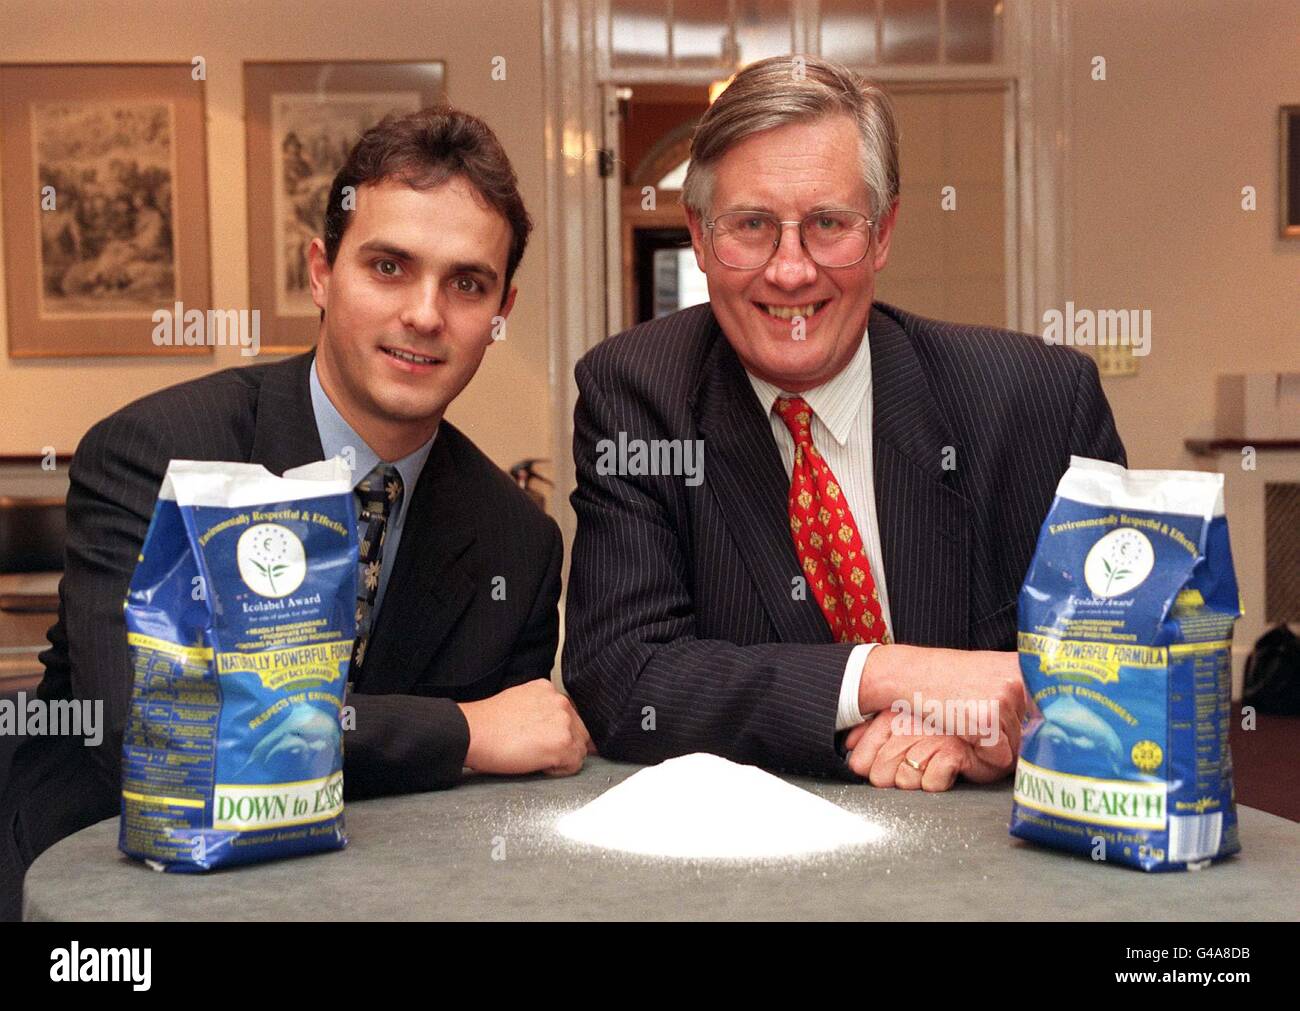 Environment Minister Michael Meacher takes time out from a conference on sustainable consumption today (Tuesday) to meet Anthony Palmer (left), Brand Manager at Reckitt & Colman, who have been awarded an Ecolabel after the launch of their new environmentally friendly 'Down to Earth' washing powder. Photo by Lucy Husband/PA Stock Photo